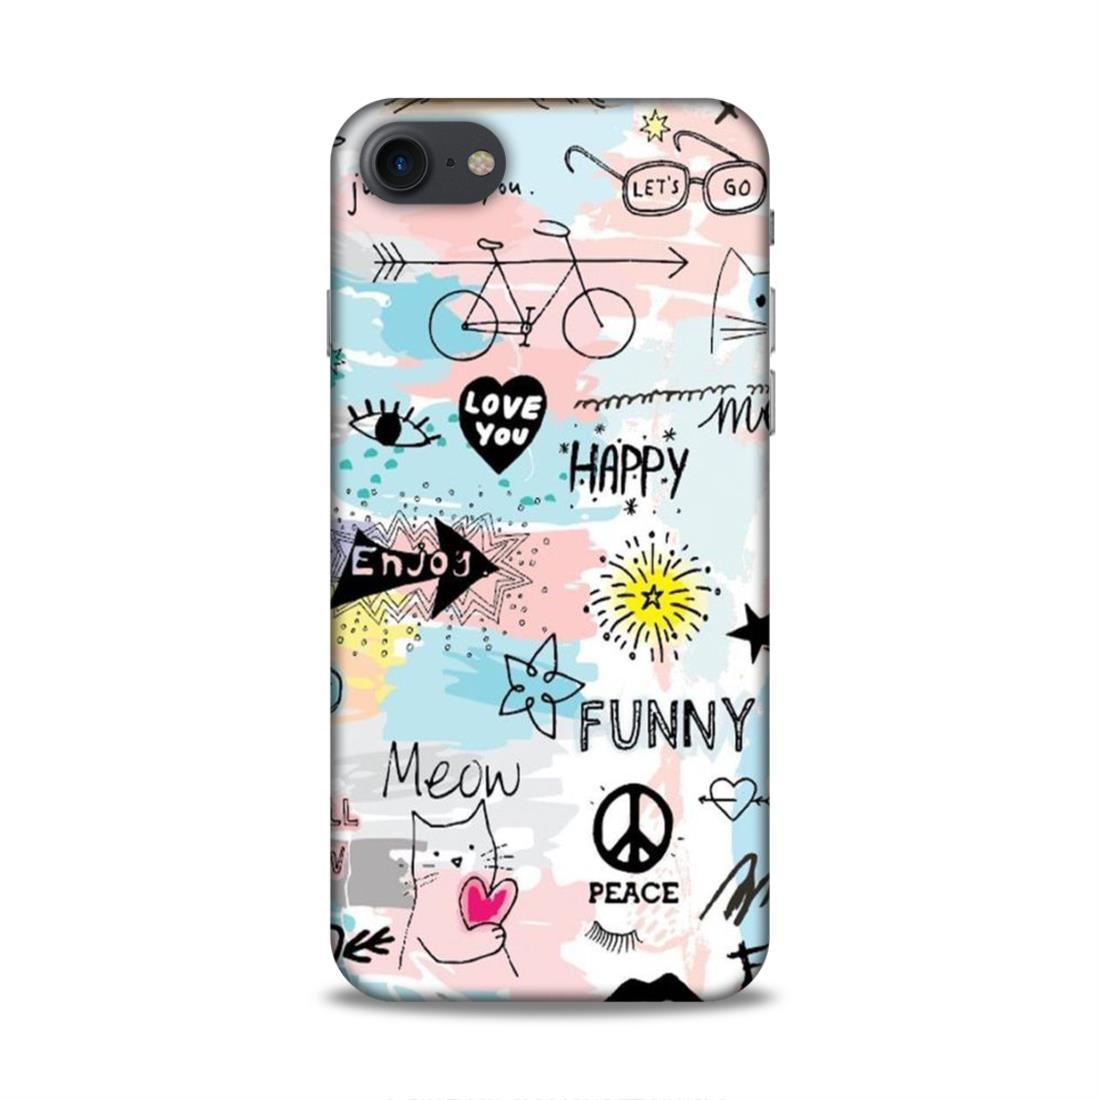 Cute Funky Happy iPhone 7 Mobile Cover Case